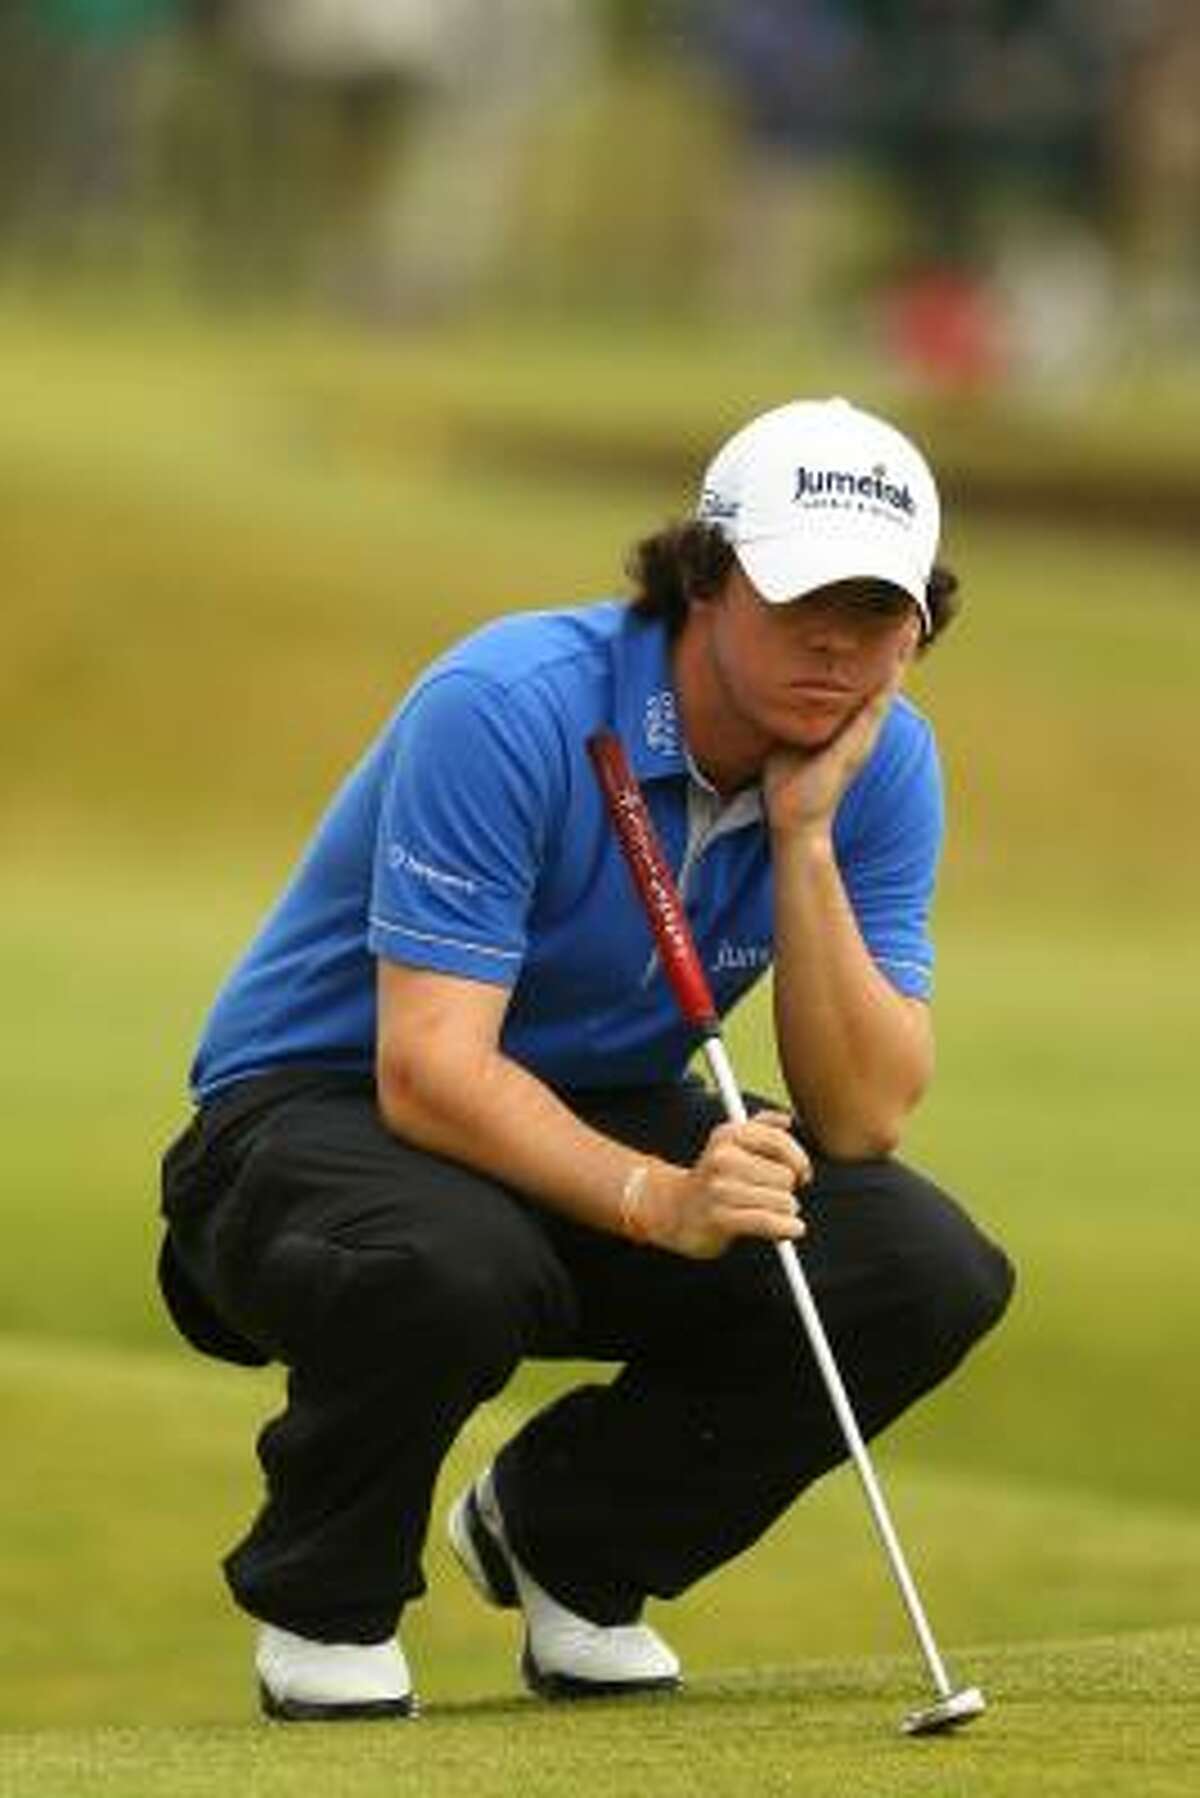 One of golf’s brightest prospects, Rory McIlroy became only the eighth player to go so low at the British Open, equaling a mark from 17 years ago by the late Payne Stewart at Royal St. George. Overall, just 22 players have shot 63 in one of the four major tournaments, including Greg Norman and Vijay Singh, who each did it twice.